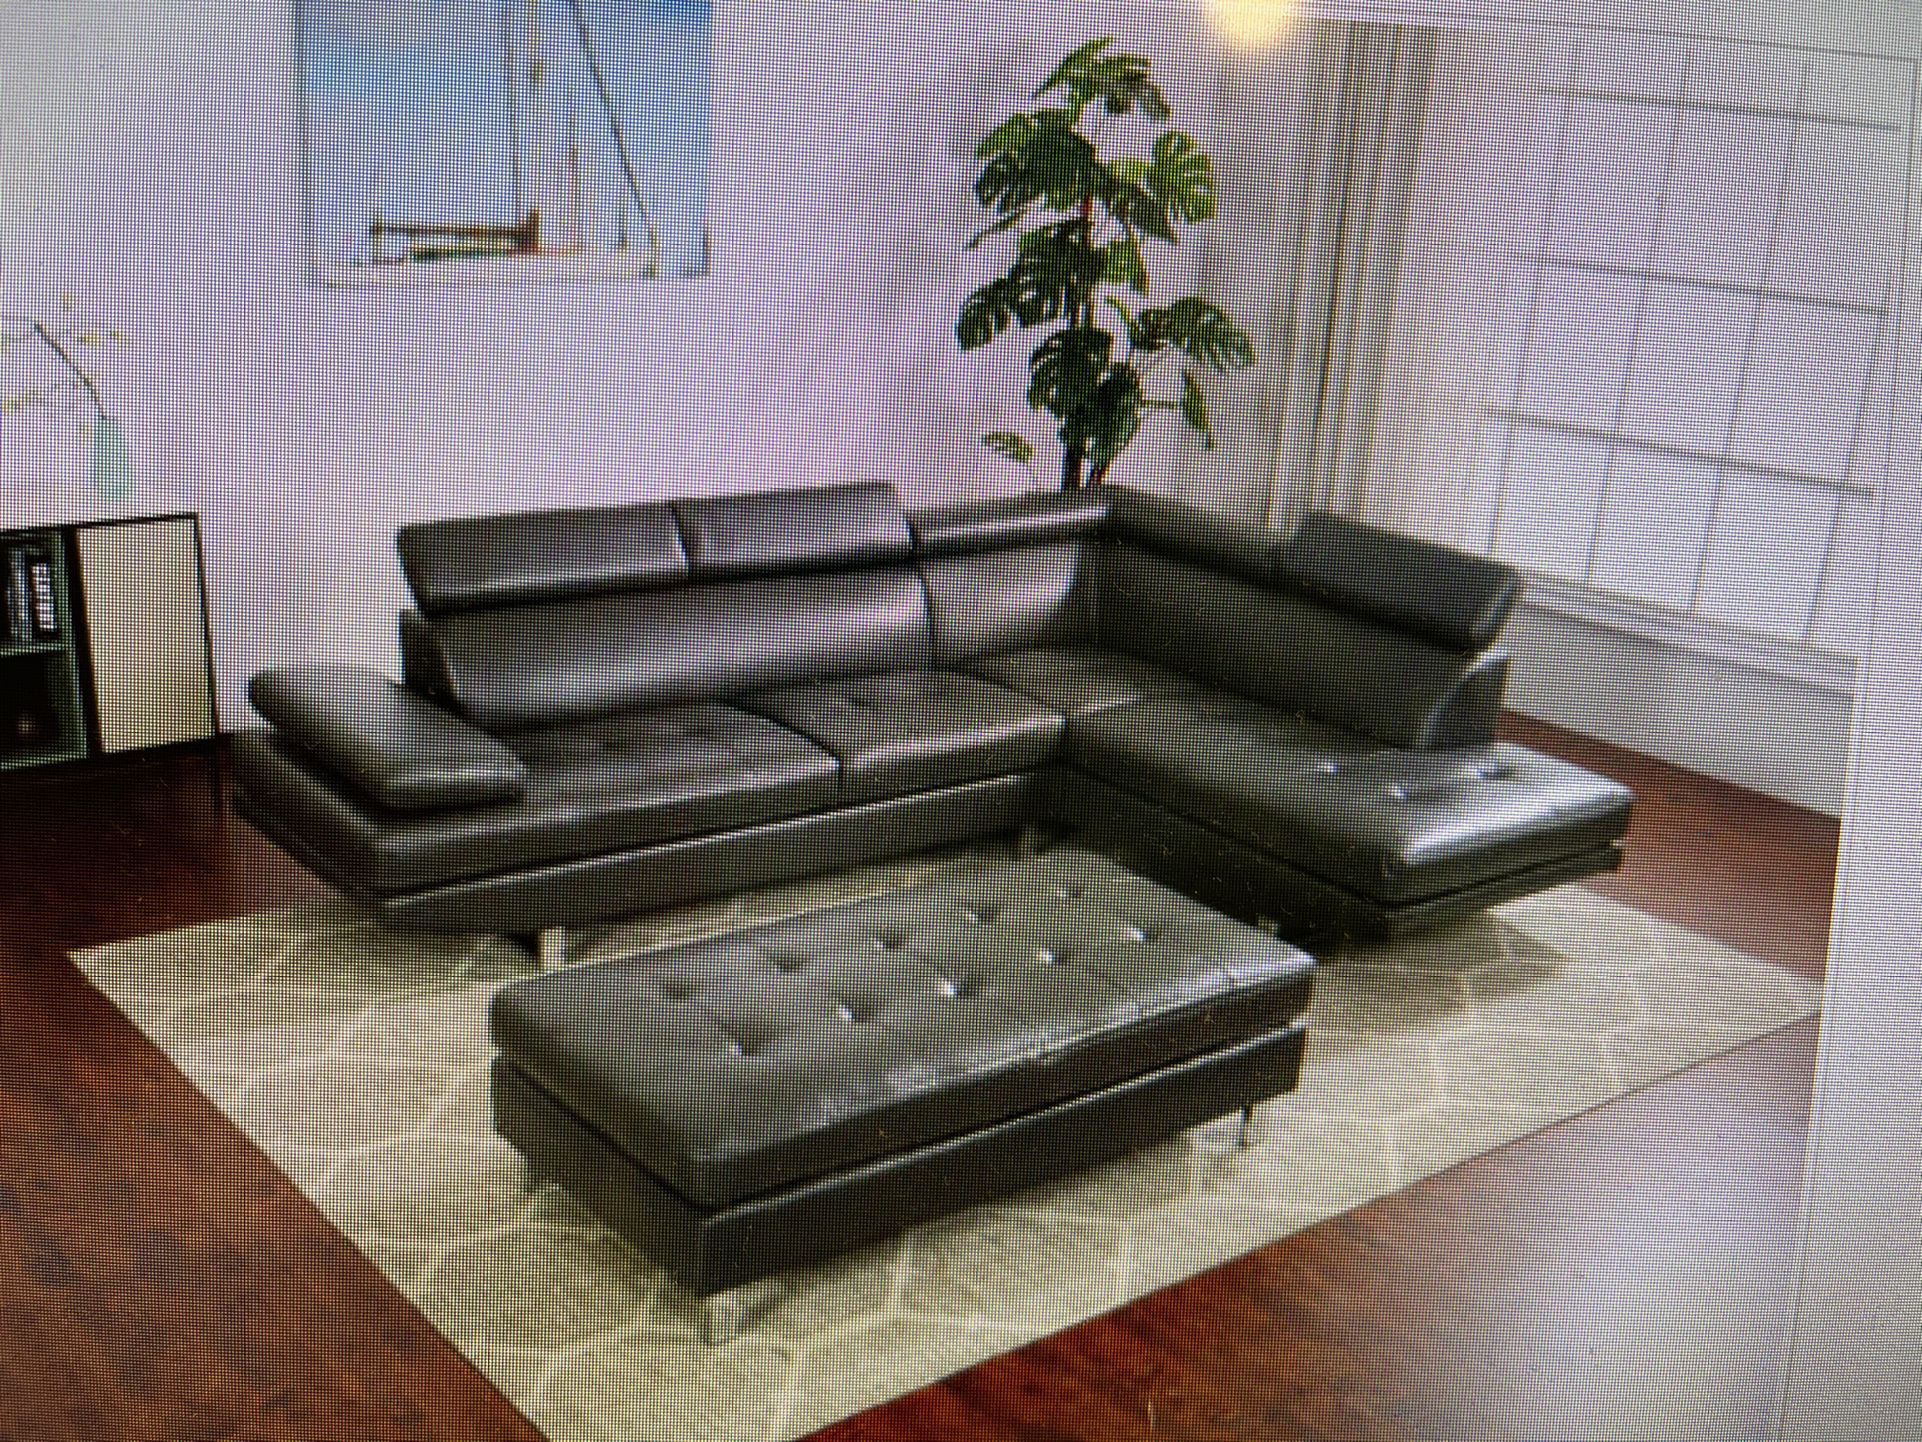 COMFY NEW IBIZA SECTIONAL SOFA AND OTTOMAN SET ON SALE ONLY $1099. FINANCING AVAILABLE 